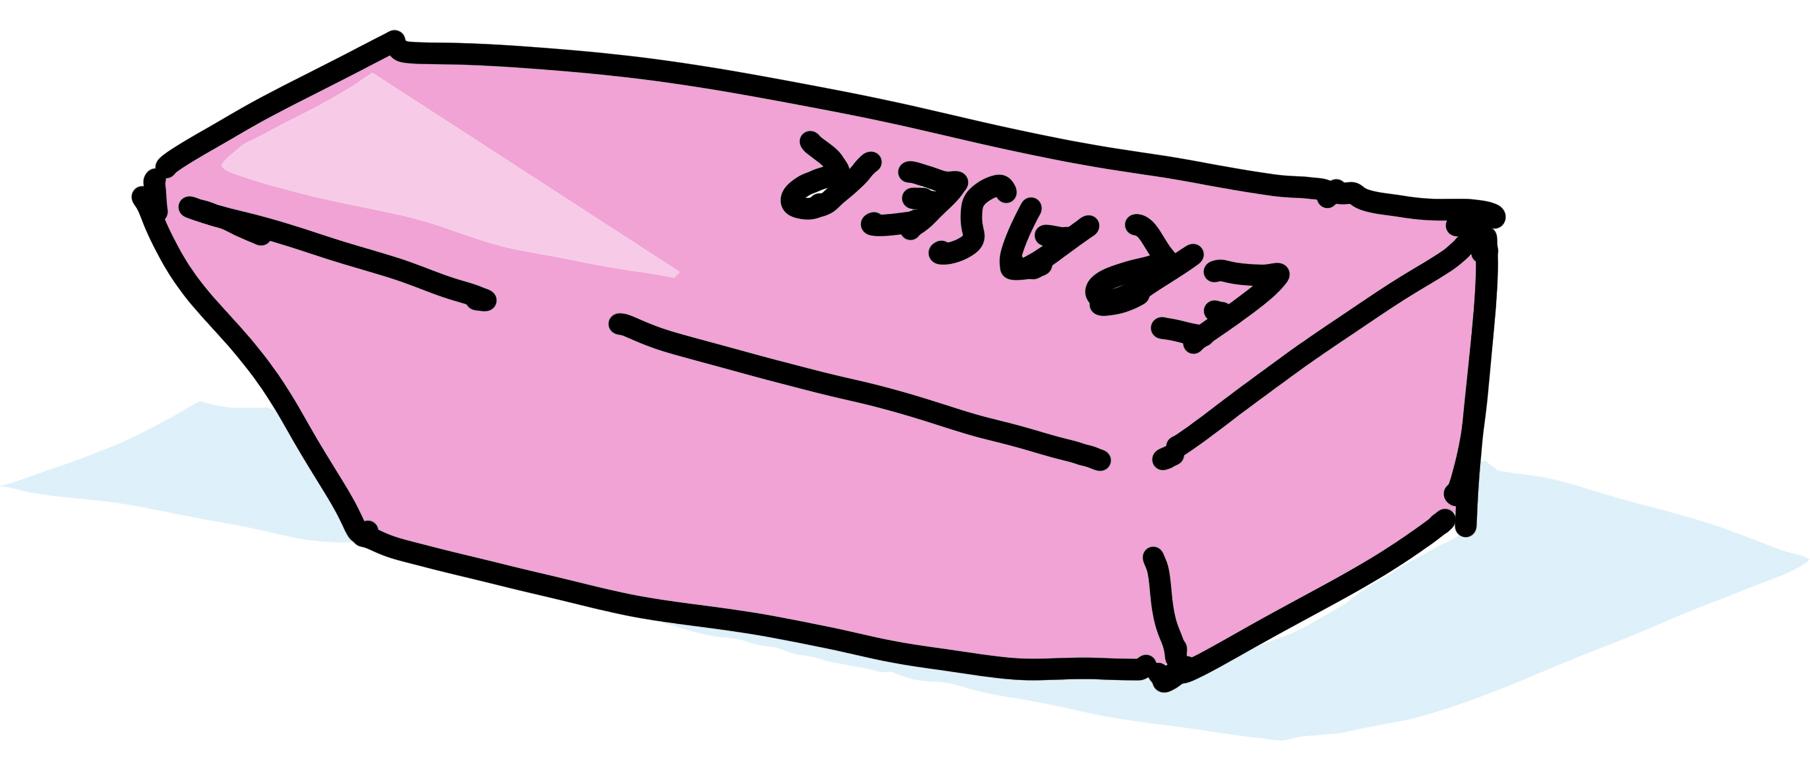 A simple illustration shows a traditional pink school eraser.